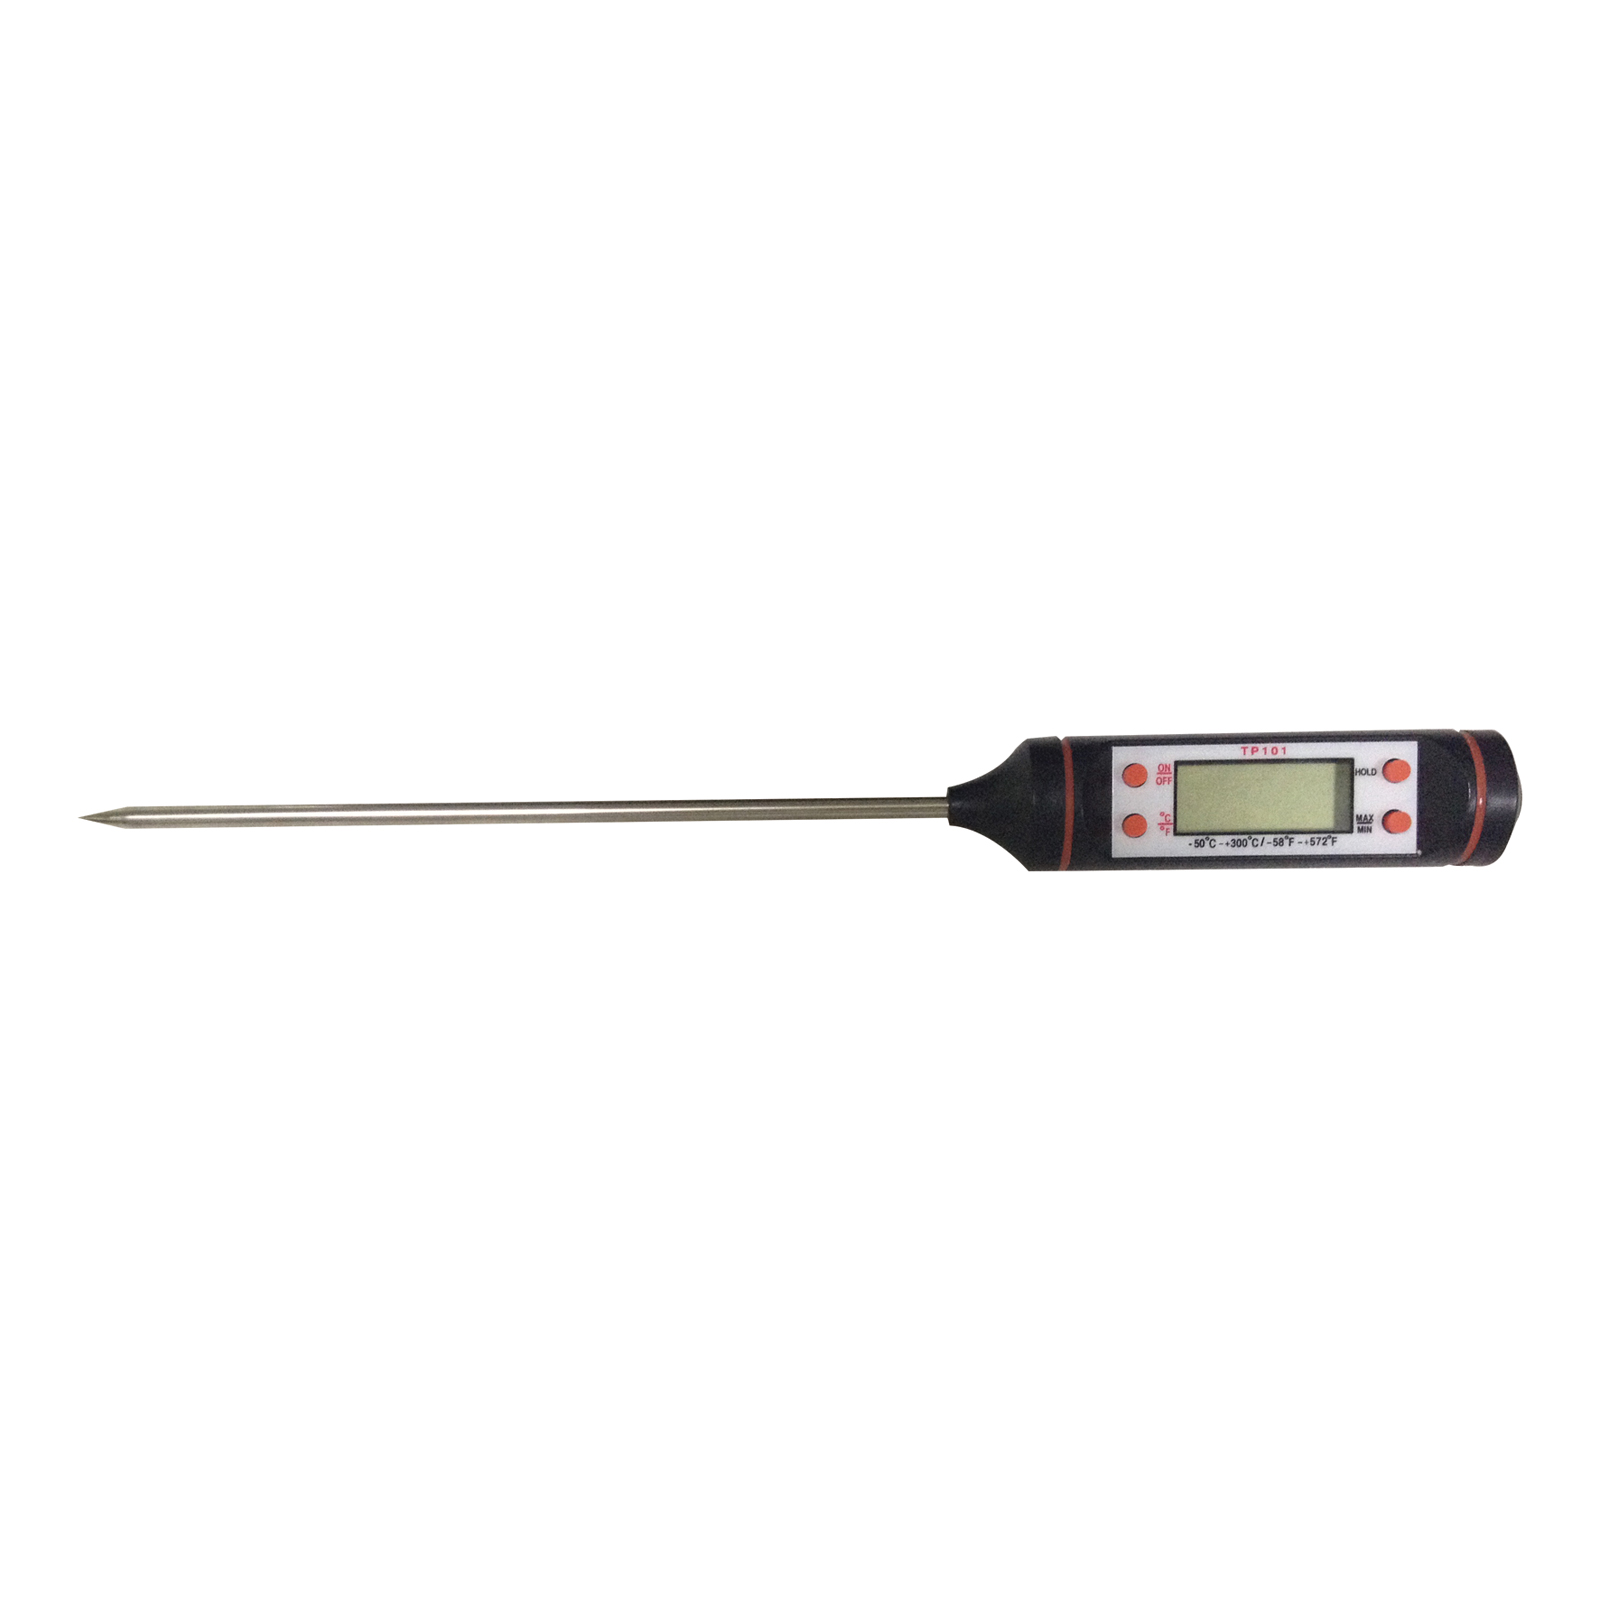 Endeavour Tools ET2024 Air Conditioning Thermometer